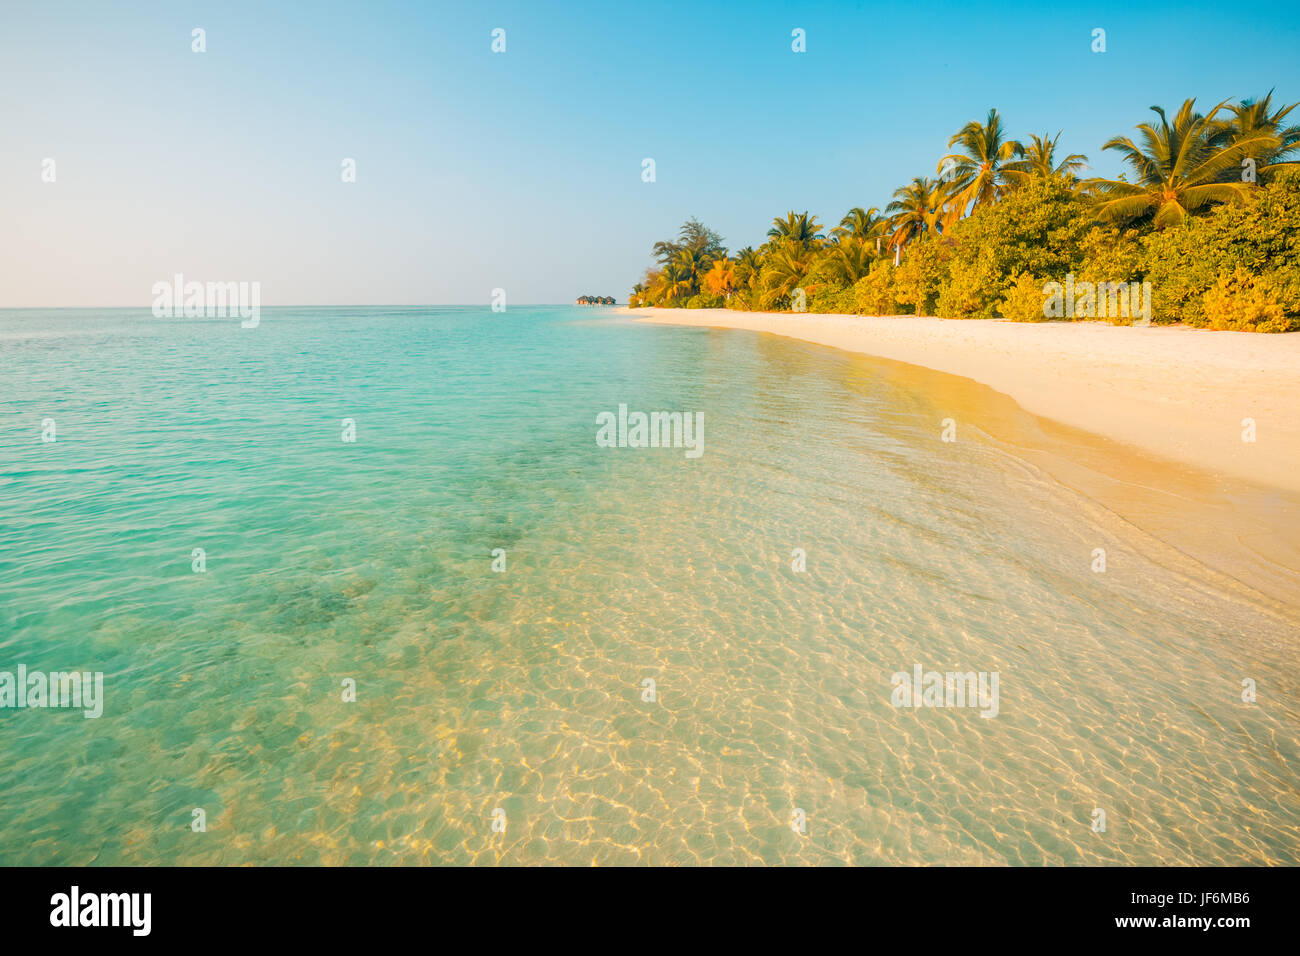 Perfect beach view. Summer holiday and vacation design. Inspirational tropical beach, palm trees and white sand. Tranquil scenery, relaxing beach Stock Photo